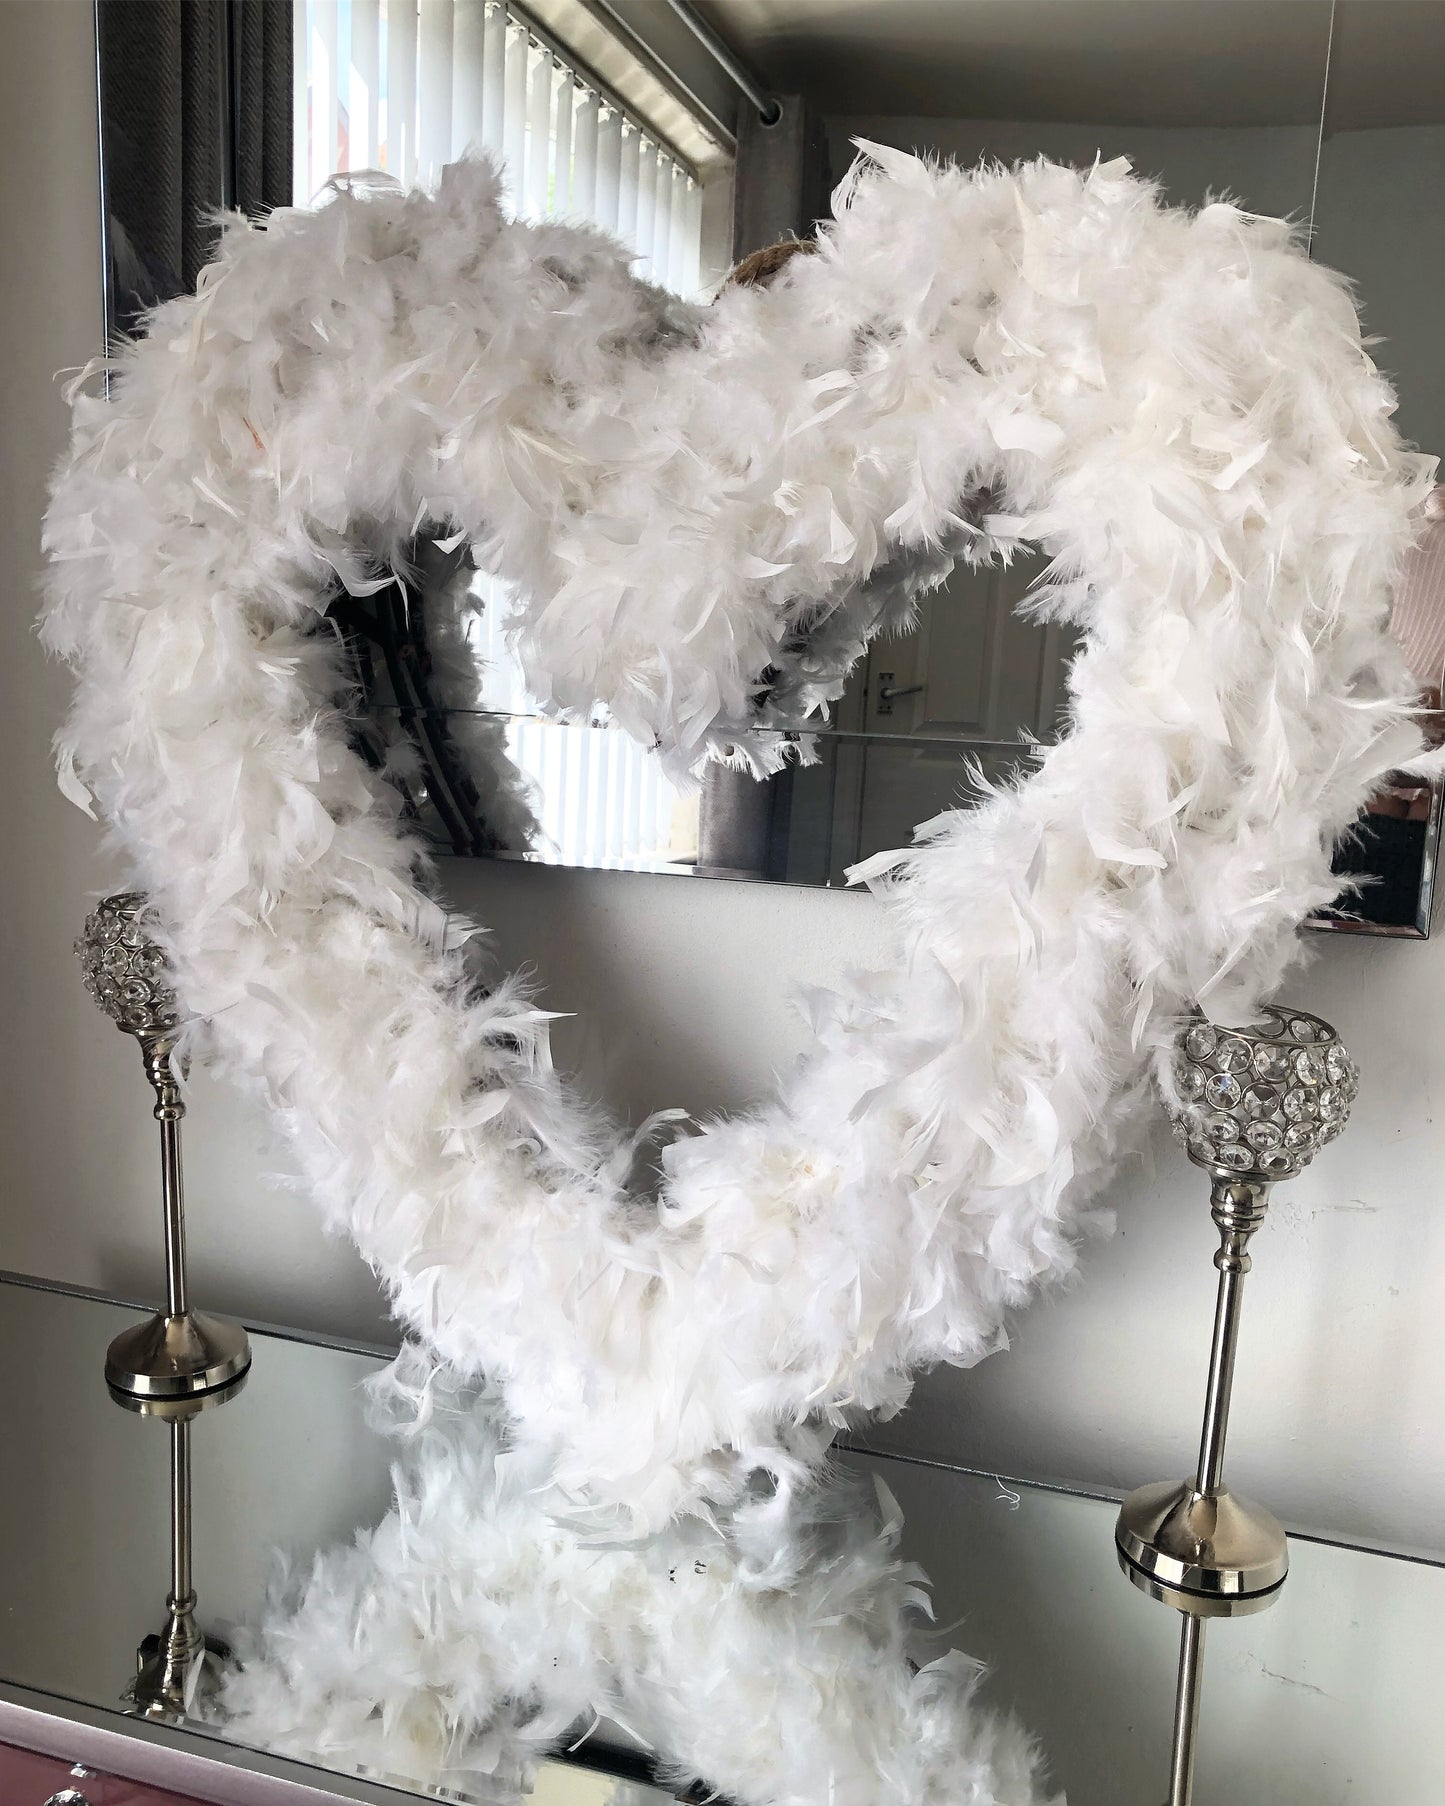 White Feather Heart Wreath 2-4 WEEKS